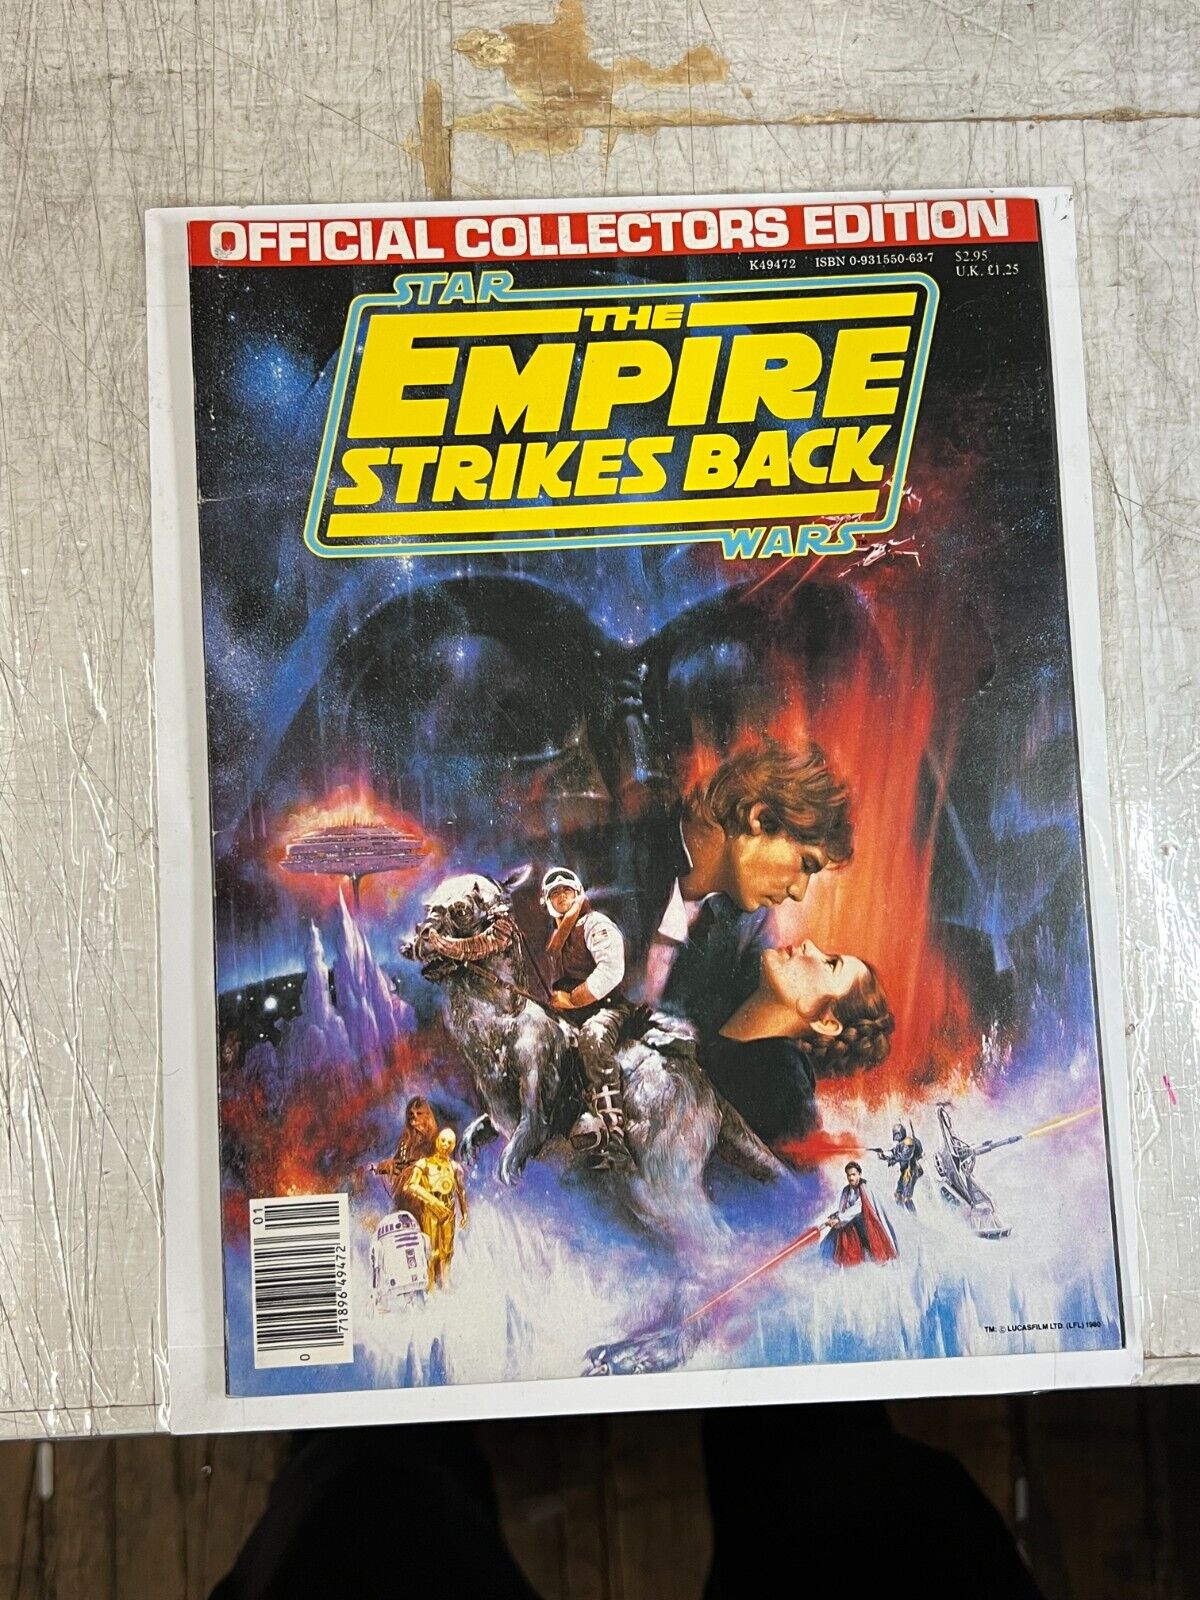 Official Collectors Edition Star Wars The Empire Strikes Back 1980 1st Edition |